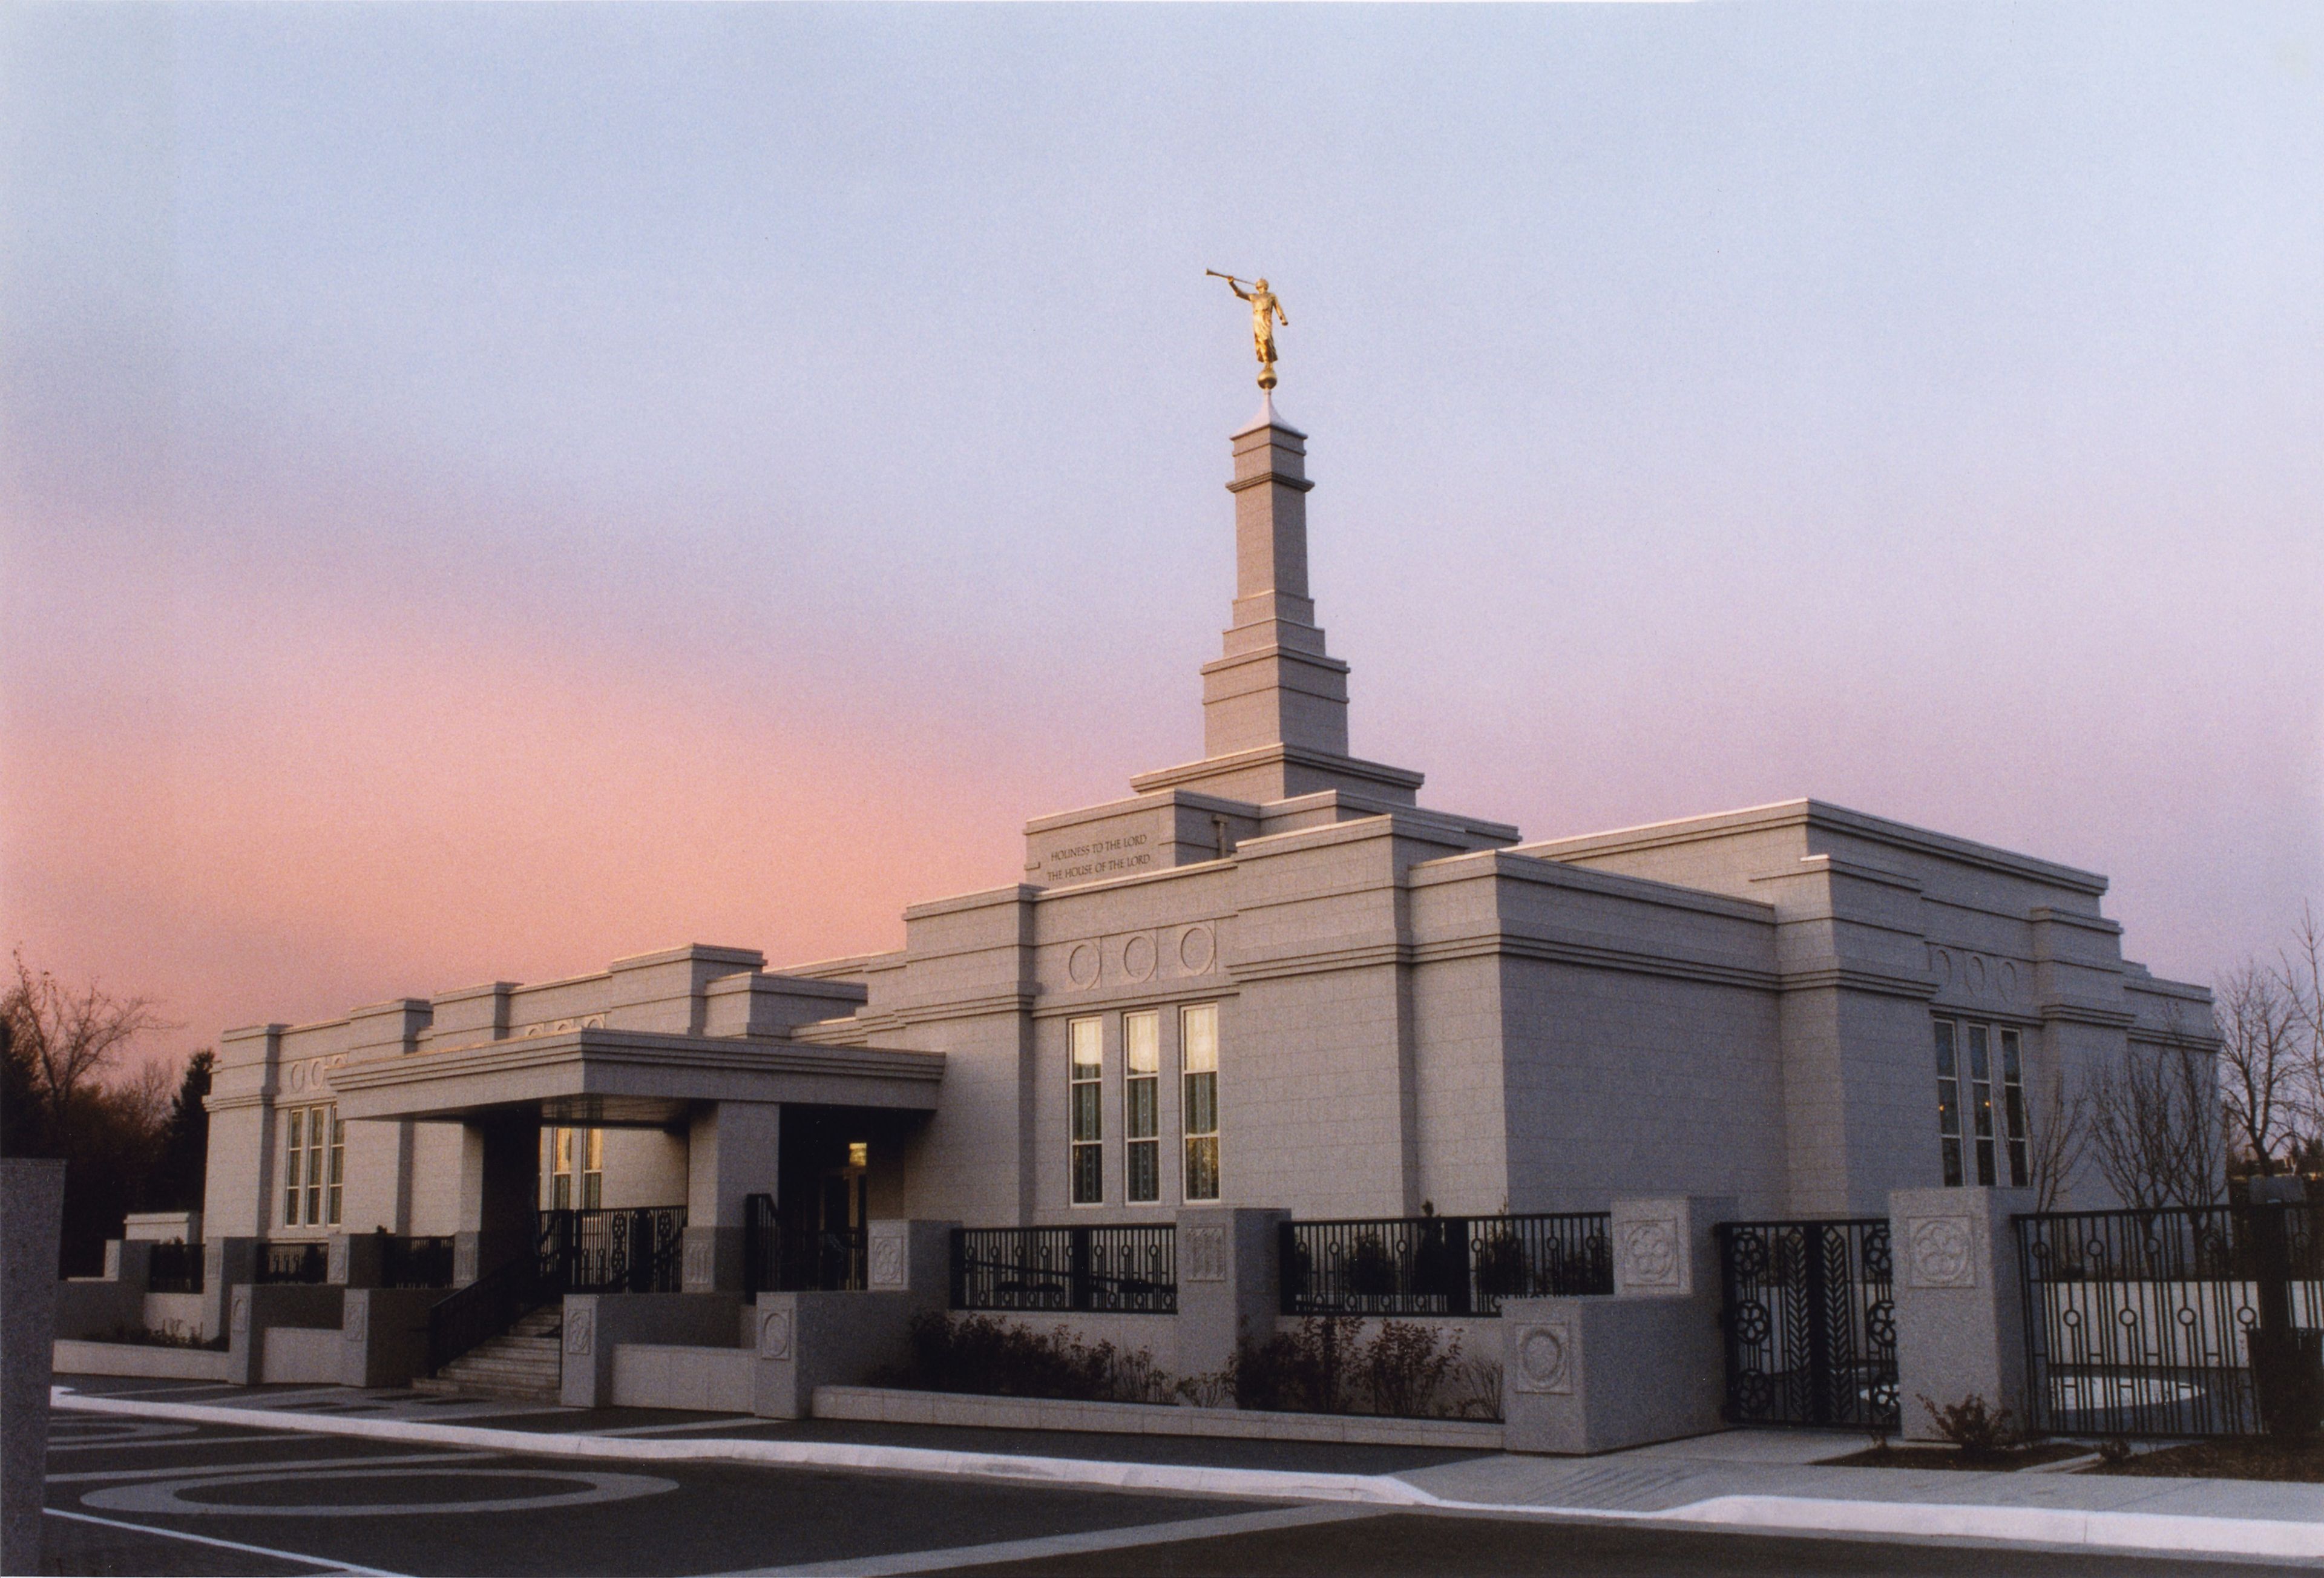 A view of the Edmonton Alberta Temple in the evening.